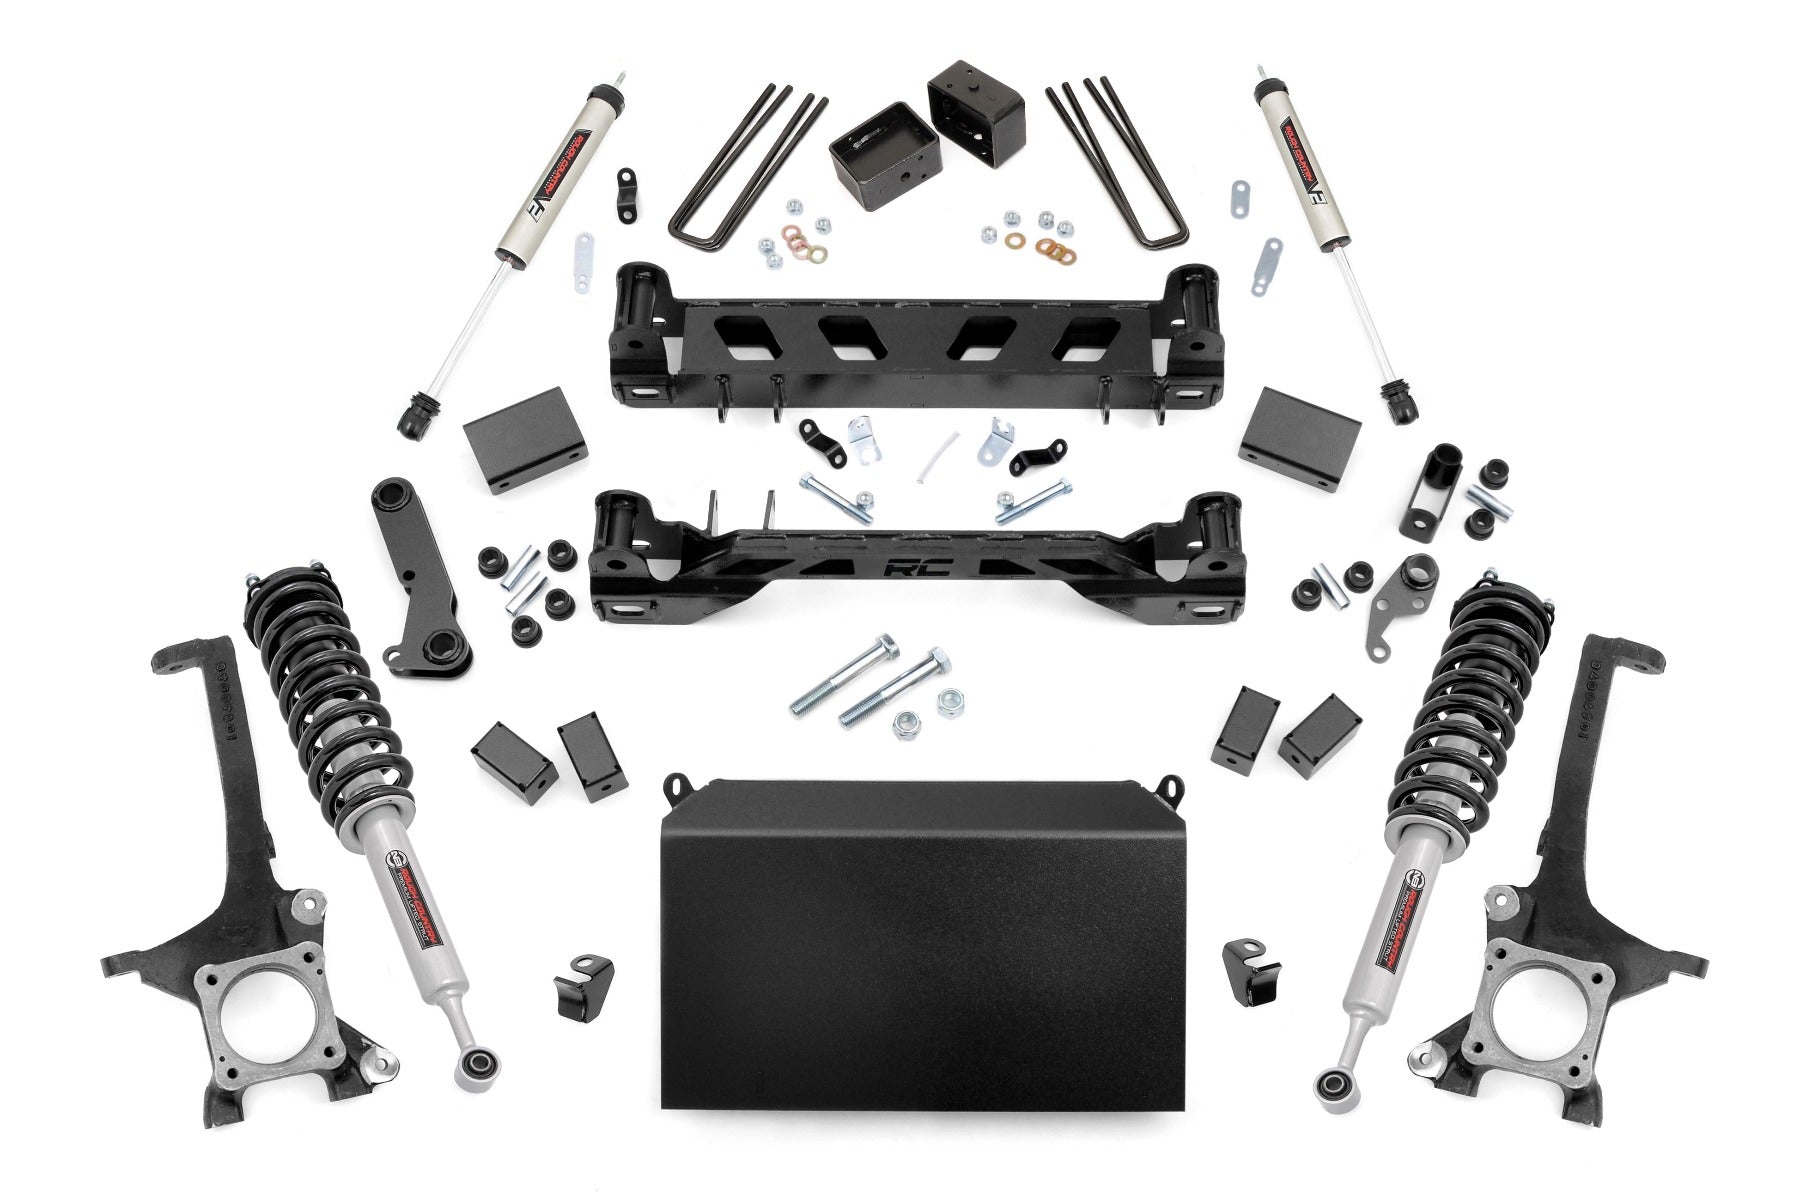 4.5 Inch Toyota Suspension Lift Kit w/ N3 Struts and V2 Shocks For 07-15 Tundra Rough Country